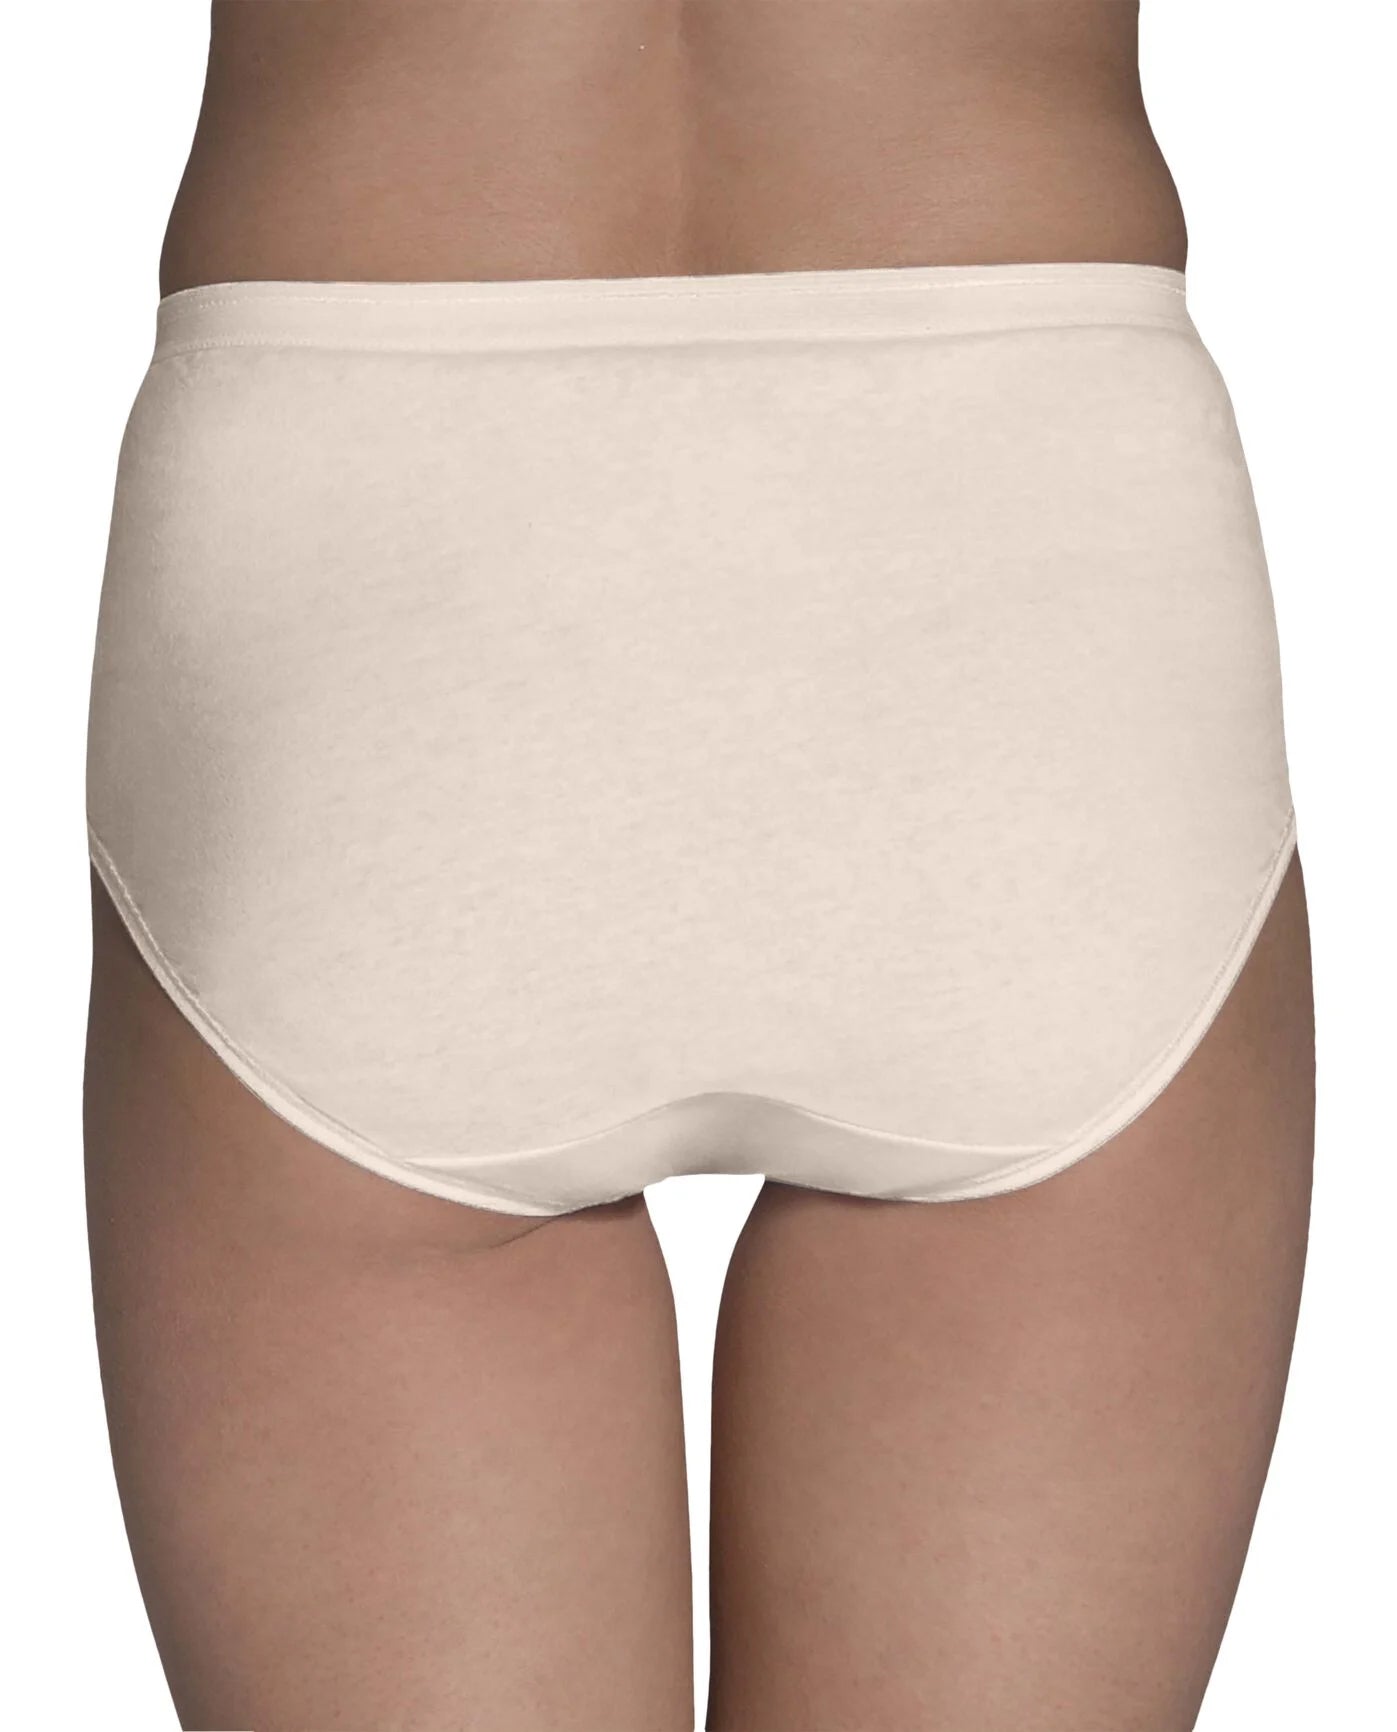 Fruit of the Loom Women's 3 Pack Cotton Hi-Cut Brief Panty, White, 5 at   Women's Clothing store